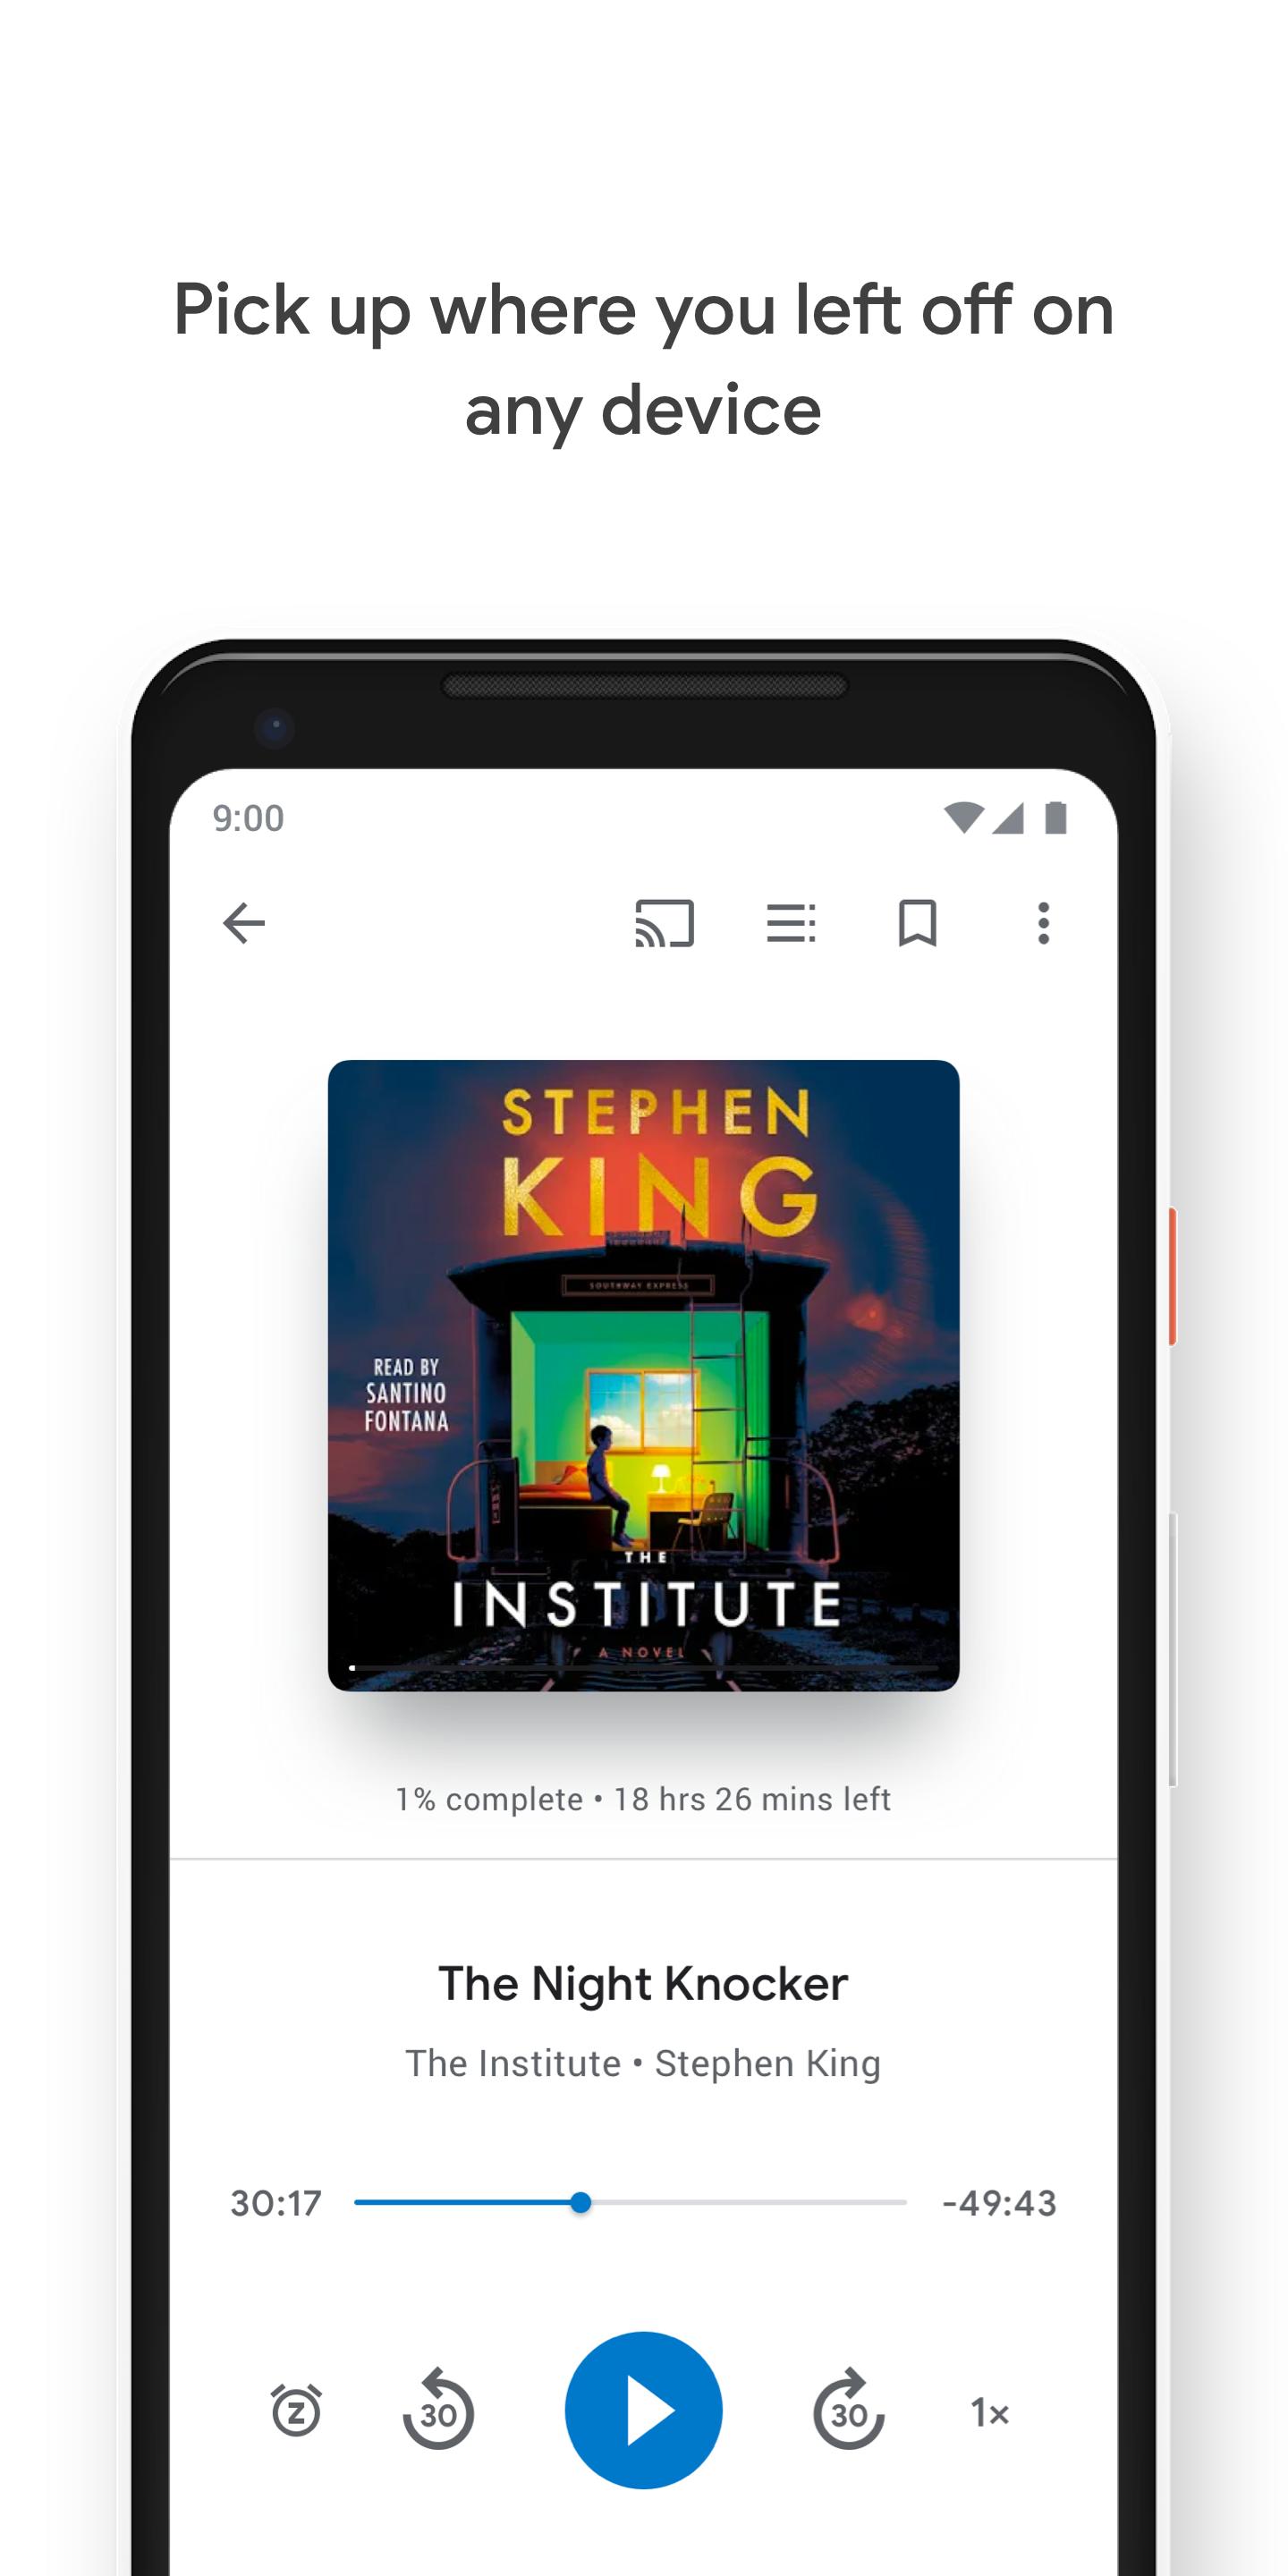 google books apk download android